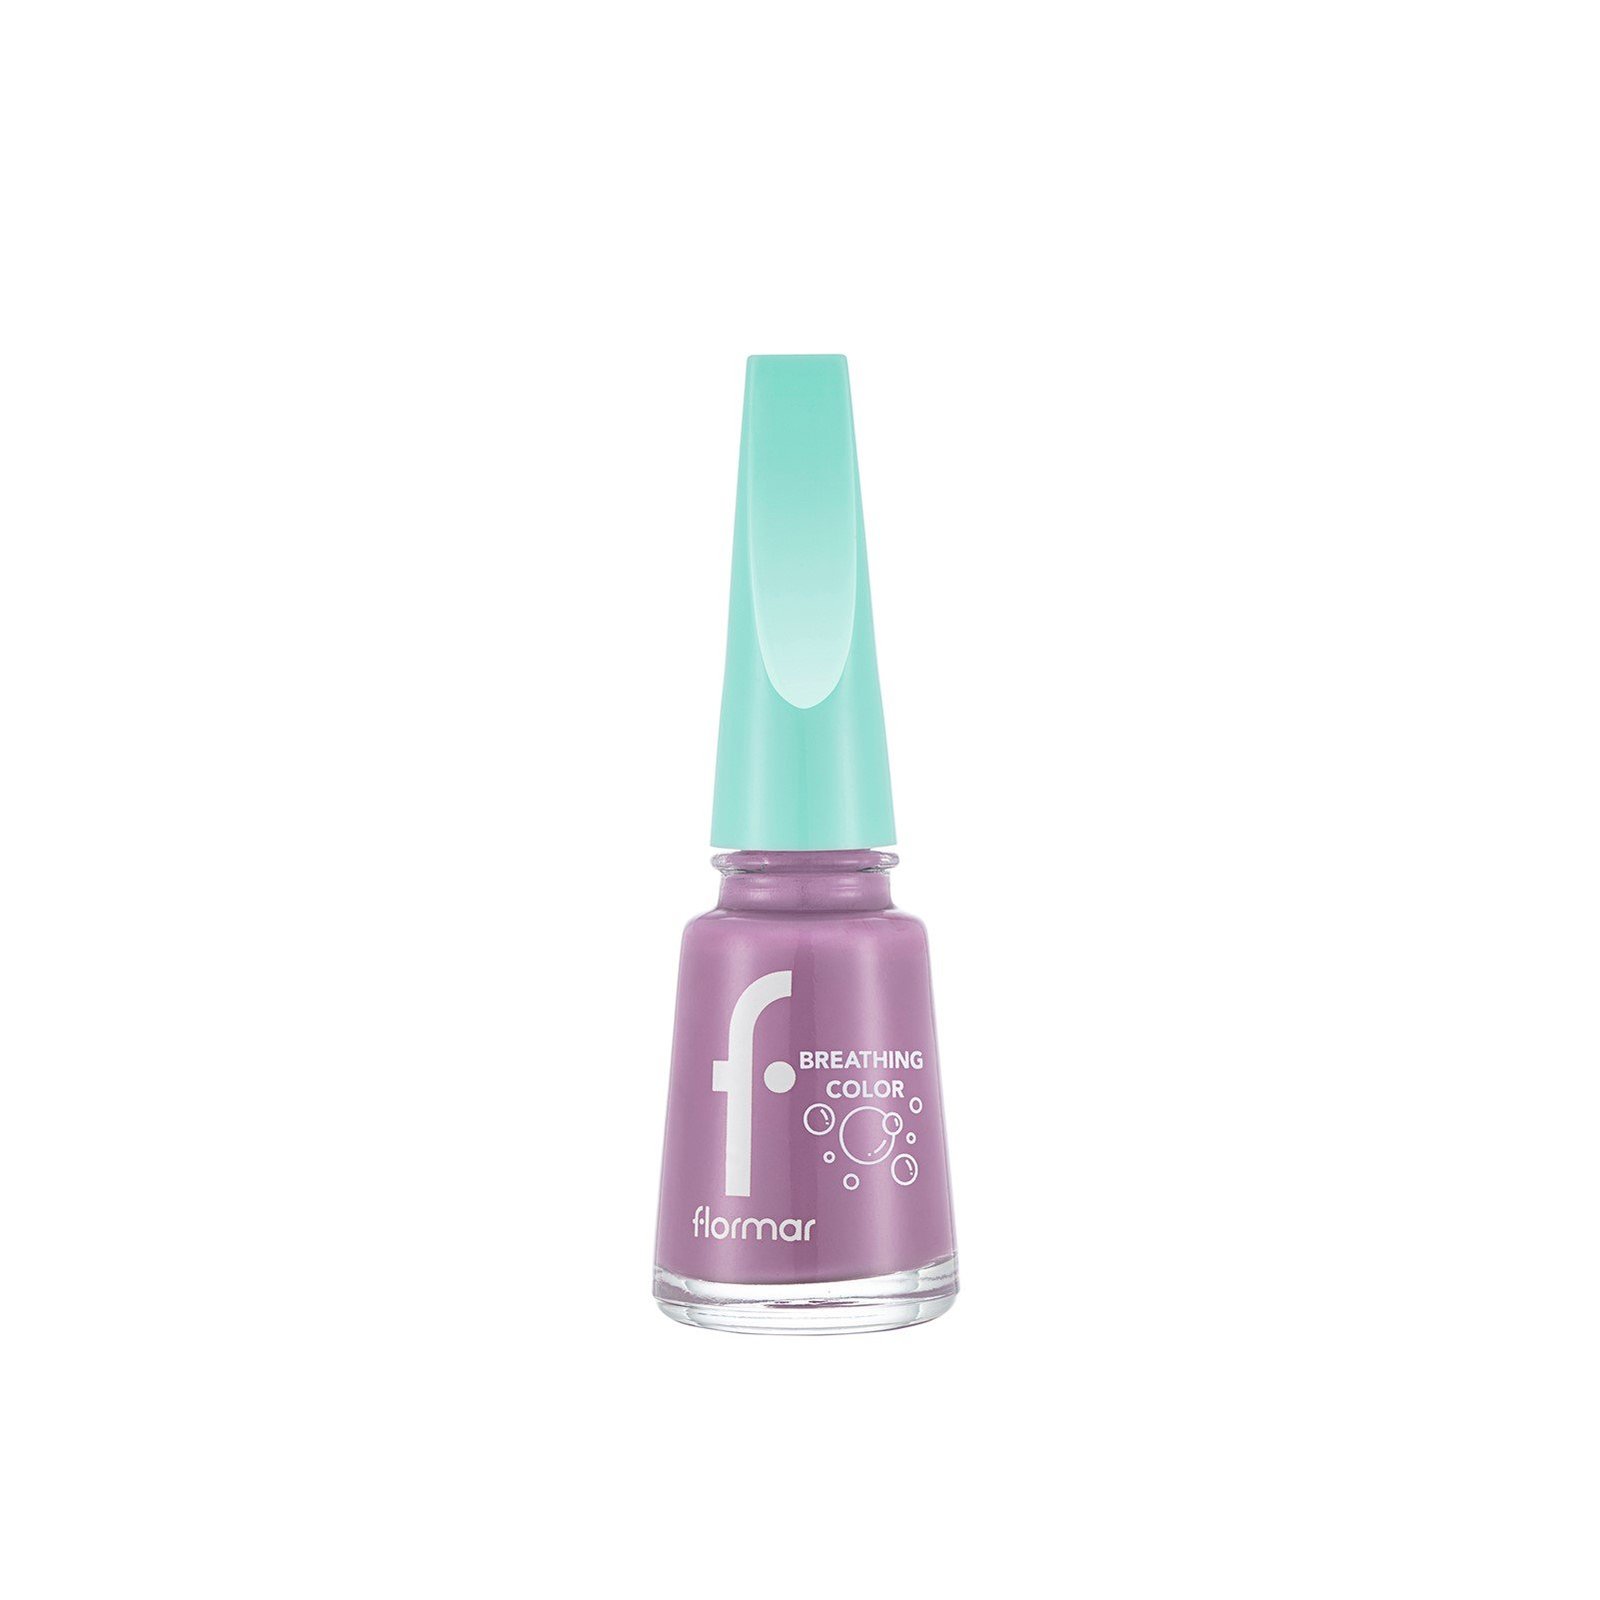 Flormar Breathing Color Nail Enamel 016 Happy With You 11ml